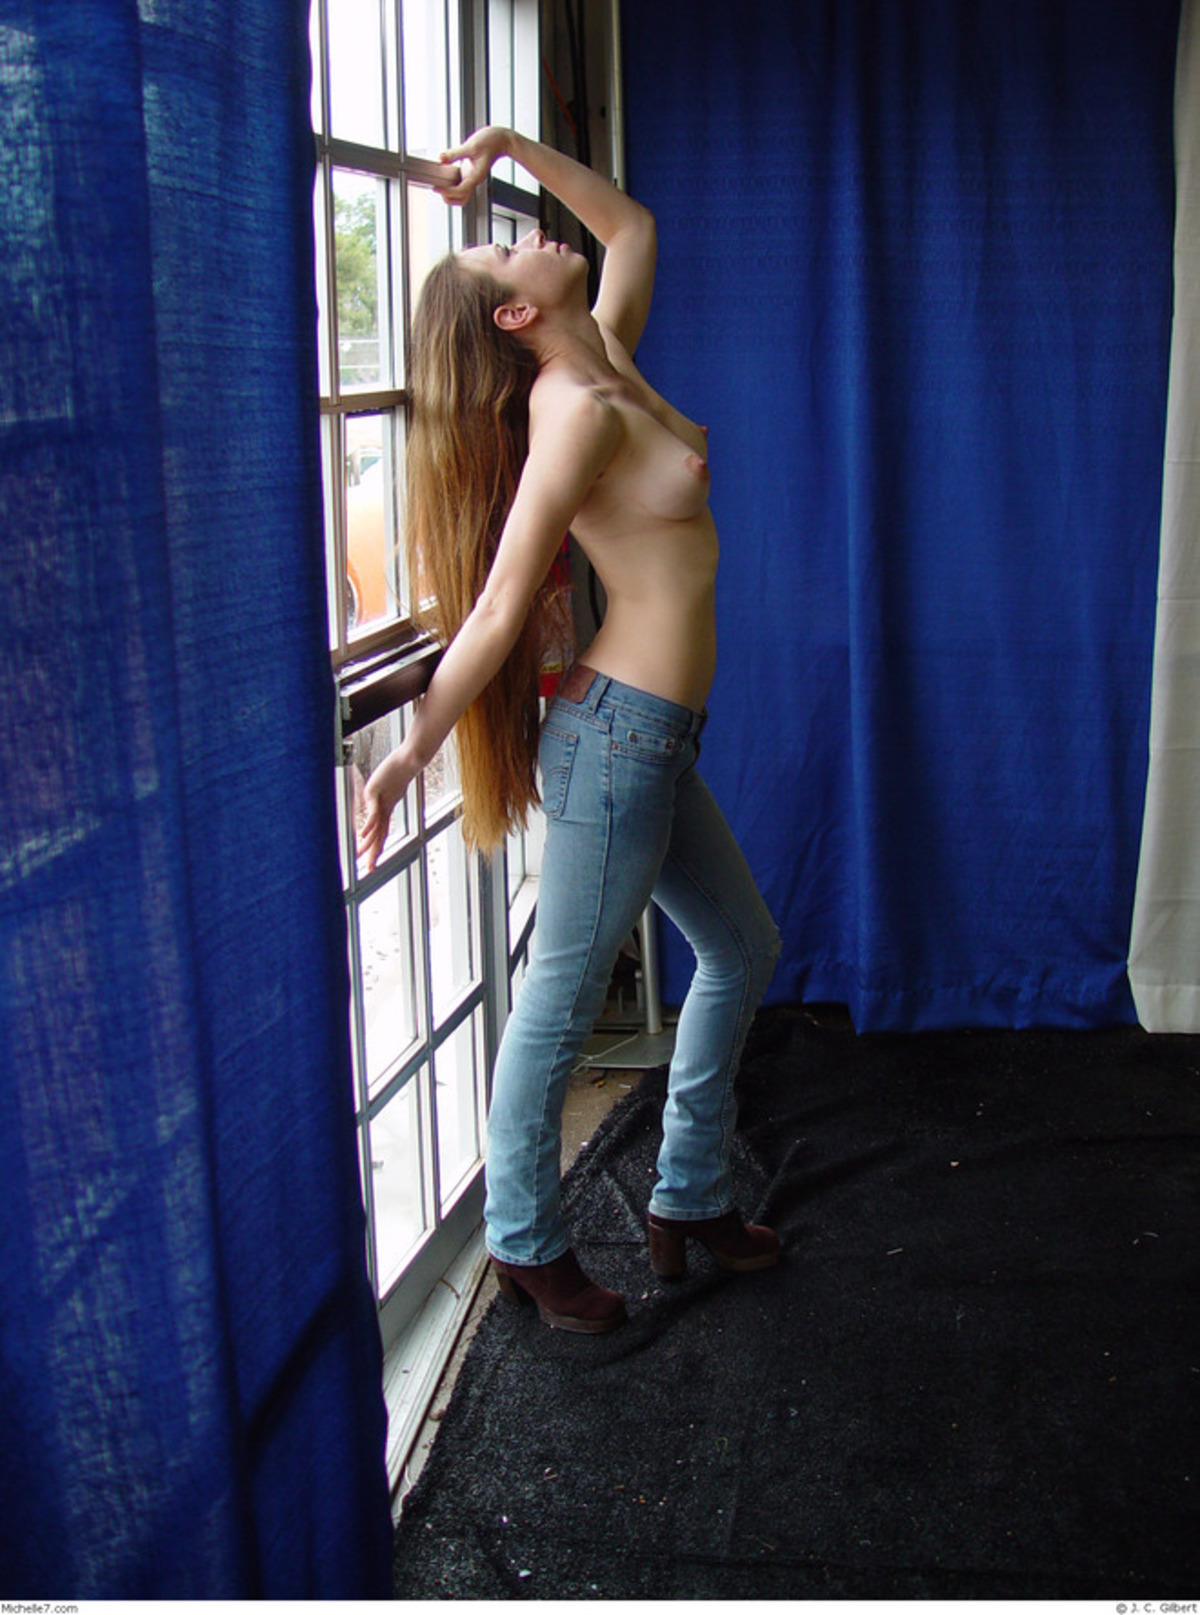 Topless Jeans Girl Posing by Window - picture 05